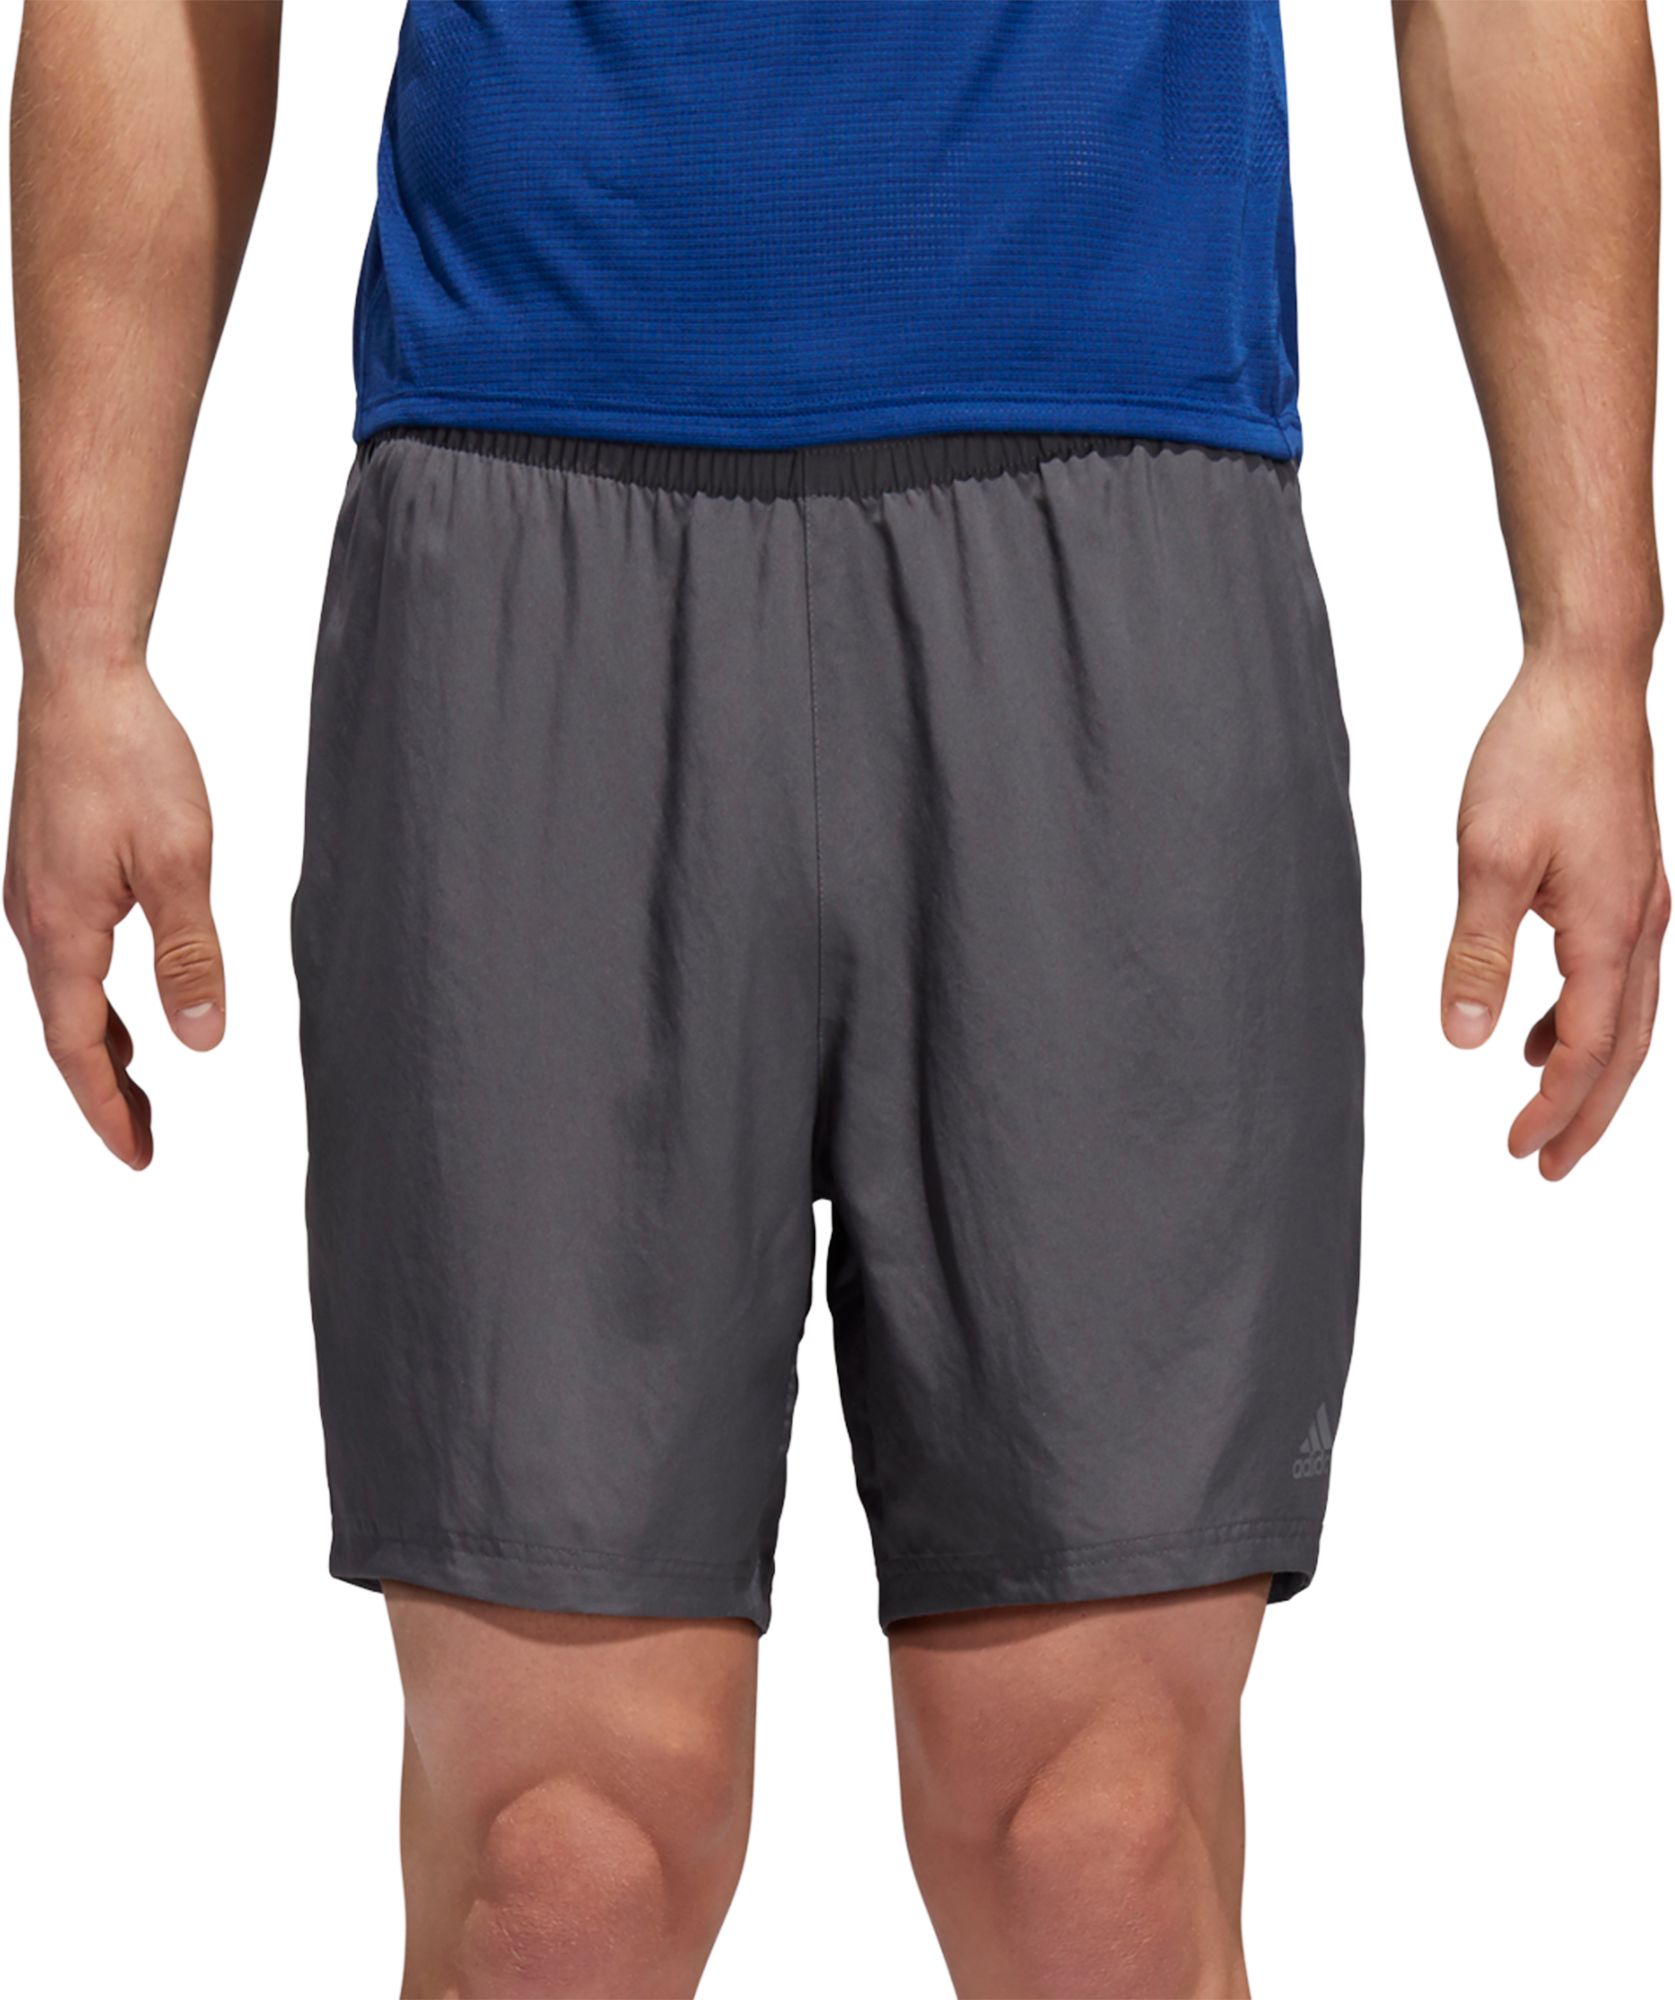 adidas shorts with liner